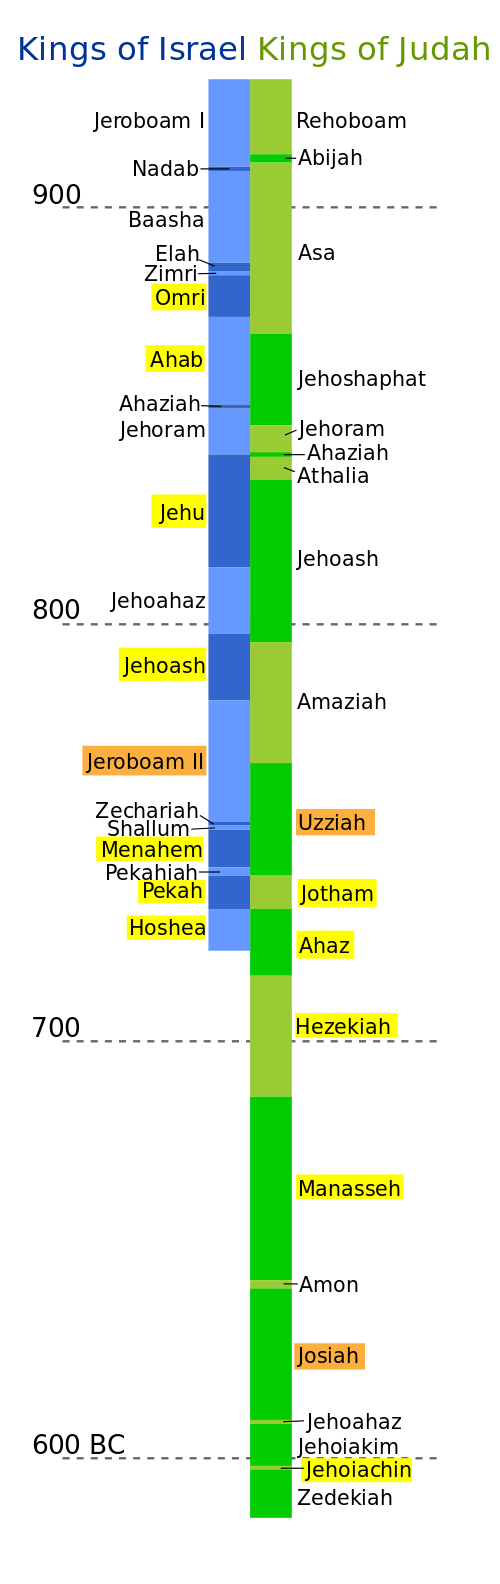 Timeline showing the kings of Israel and Judah according to the chronology from Edwin R. Thiele. Kings that are known from contemporary extra-biblical sources are highlighted in yellow. Tentatively identified kings are highlighted in orange.